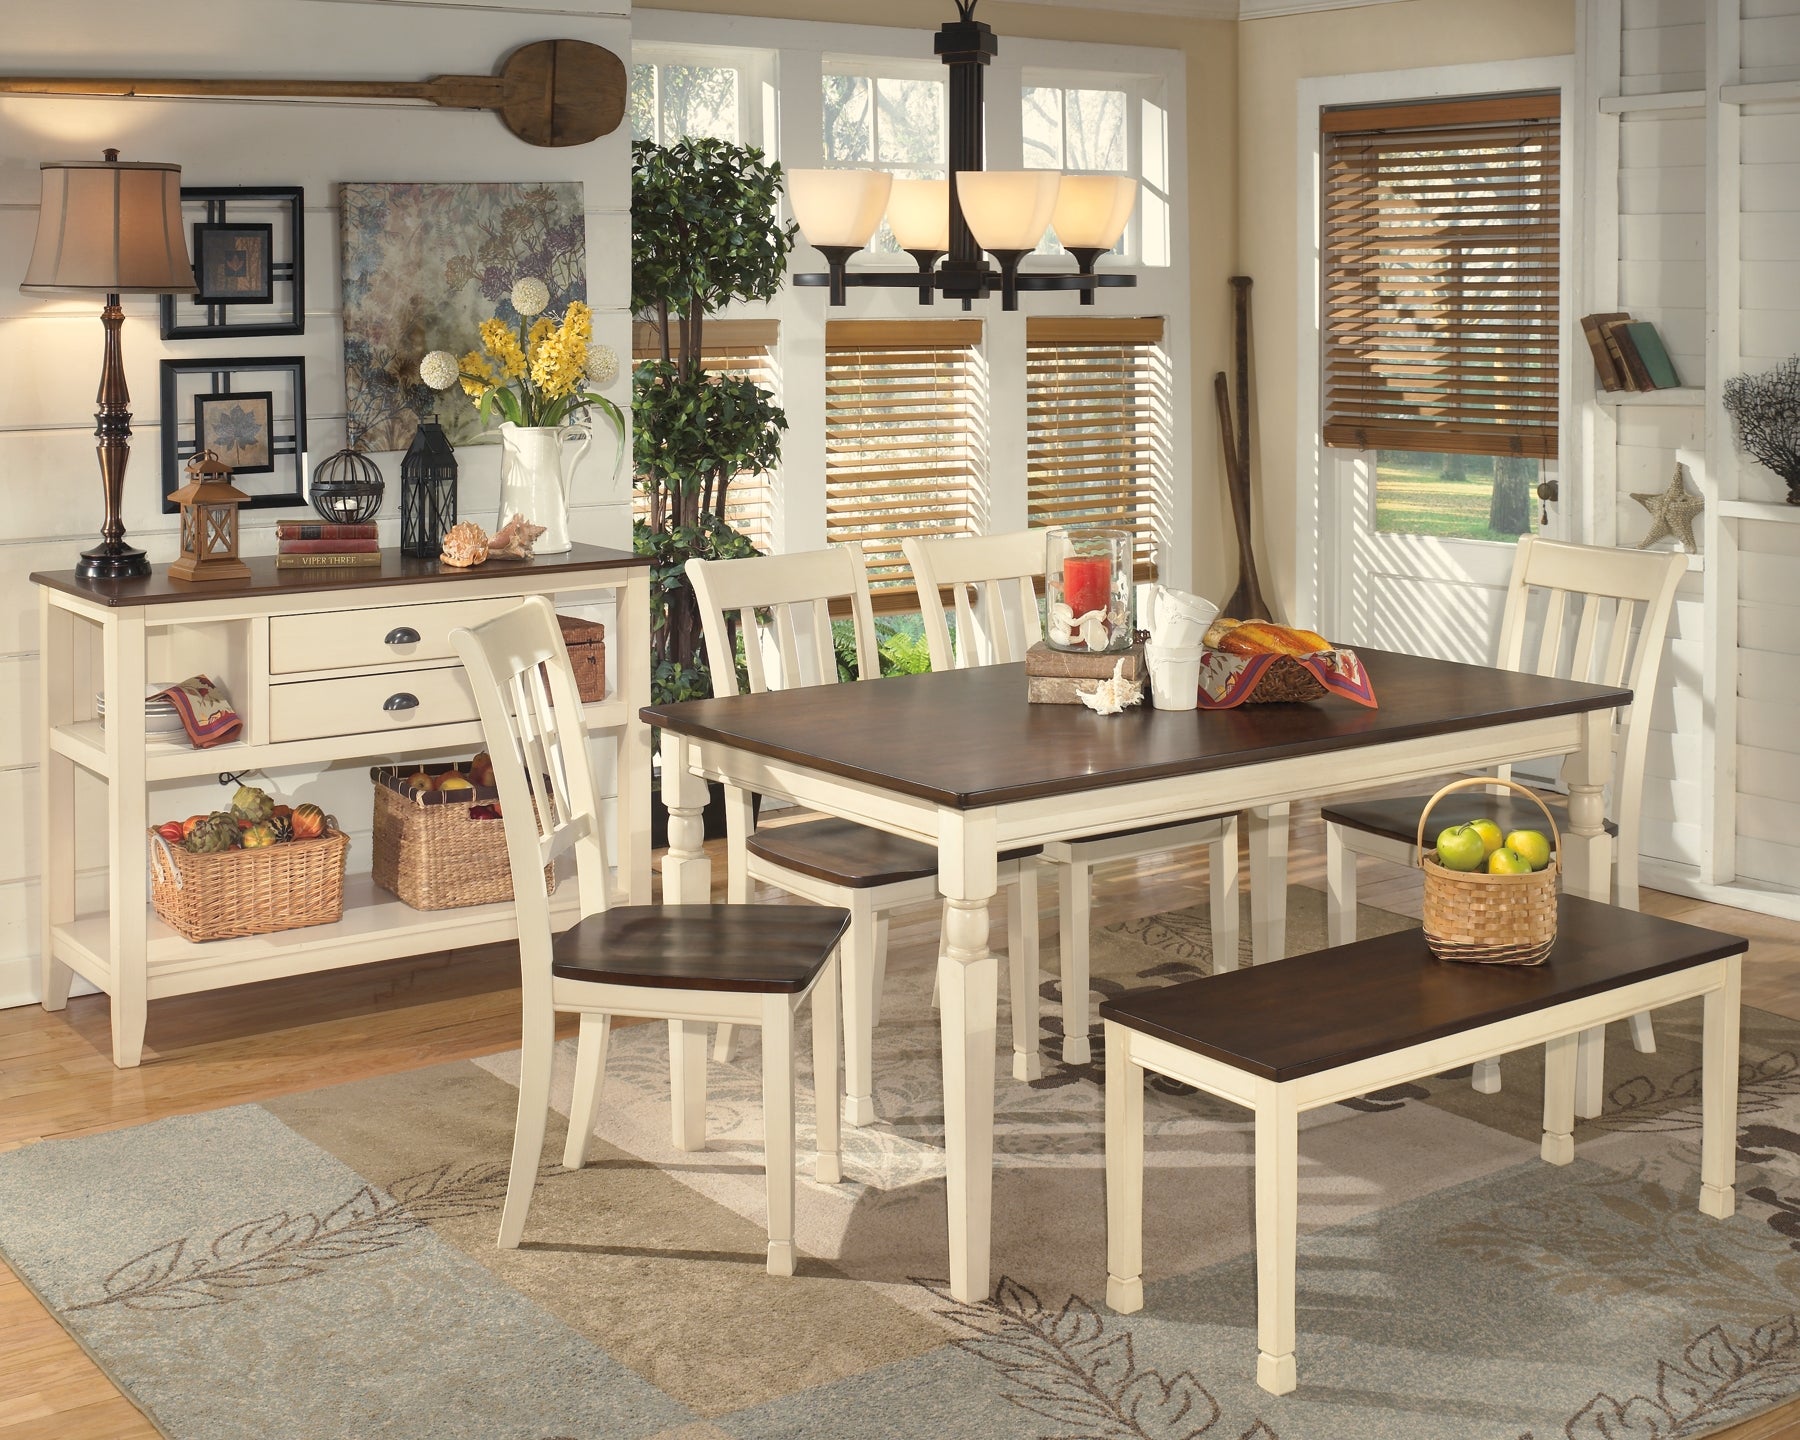 Whitesburg Dining Table and 4 Chairs and Bench with Storage Wilson Furniture (OH)  in Bridgeport, Ohio. Serving Moundsville, Richmond, Smithfield, Cadiz, & St. Clairesville